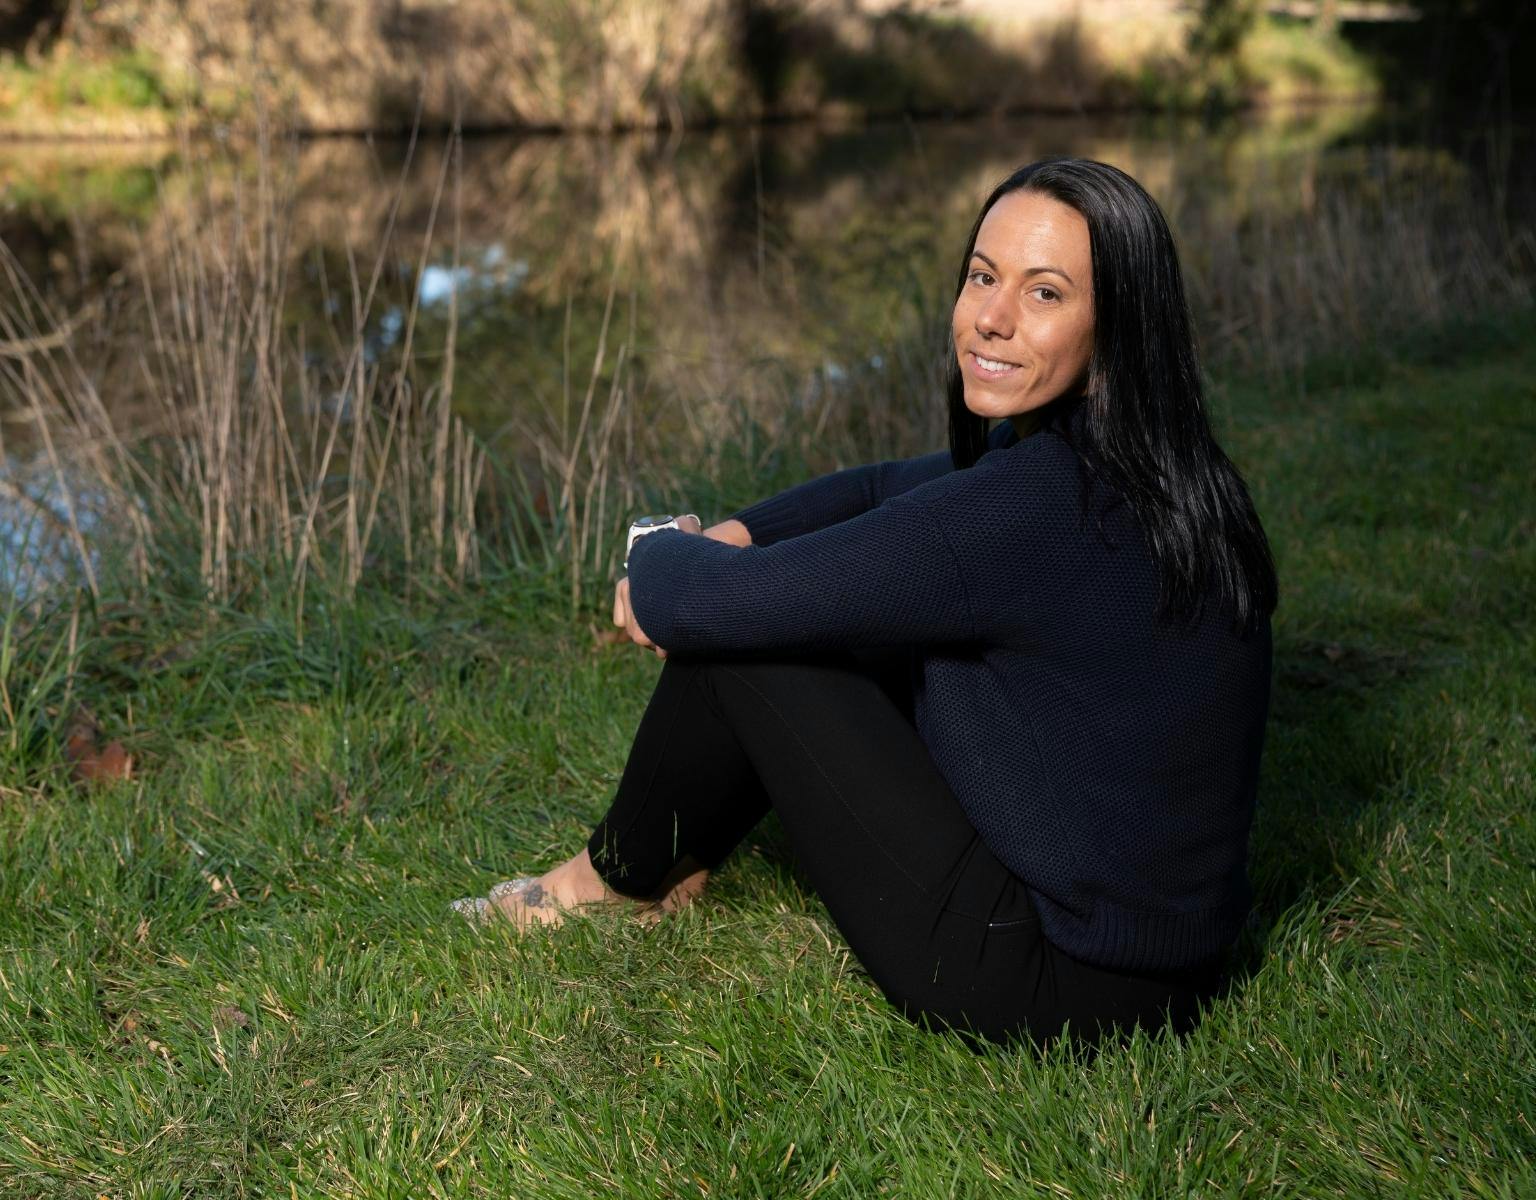 Minda Murray, a woman with long dark hair and wearing dark clothing, sits on the grass next to a pond.